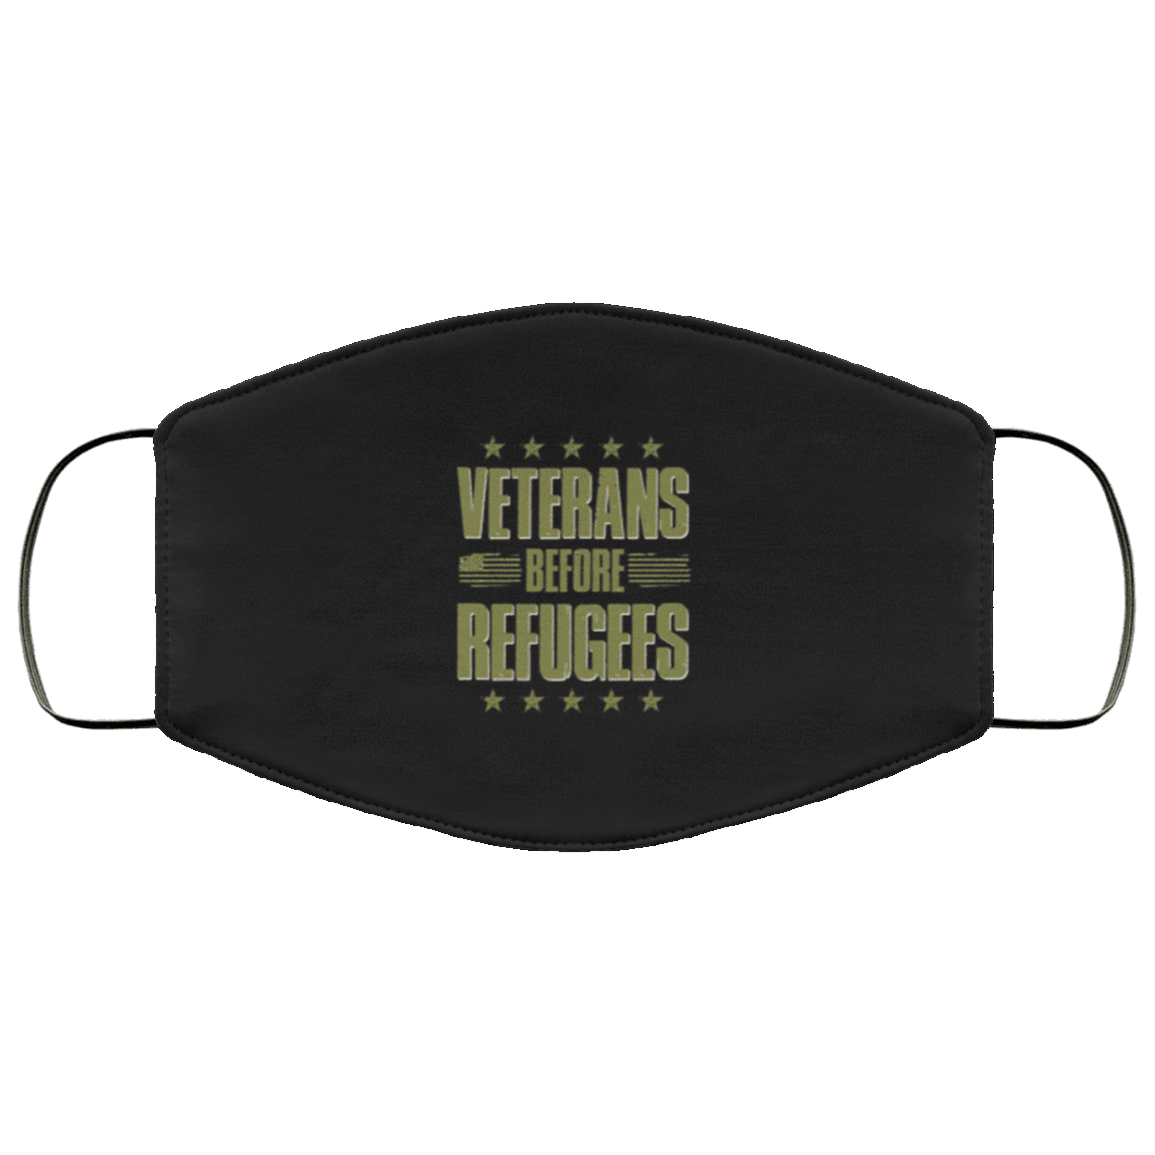 Designs by MyUtopia Shout Out:Veterans Before Refugees Adult Fabric Face Mask with Elastic Ear Loops,Fabric Face Mask / Black / Adult,Fabric Face Mask